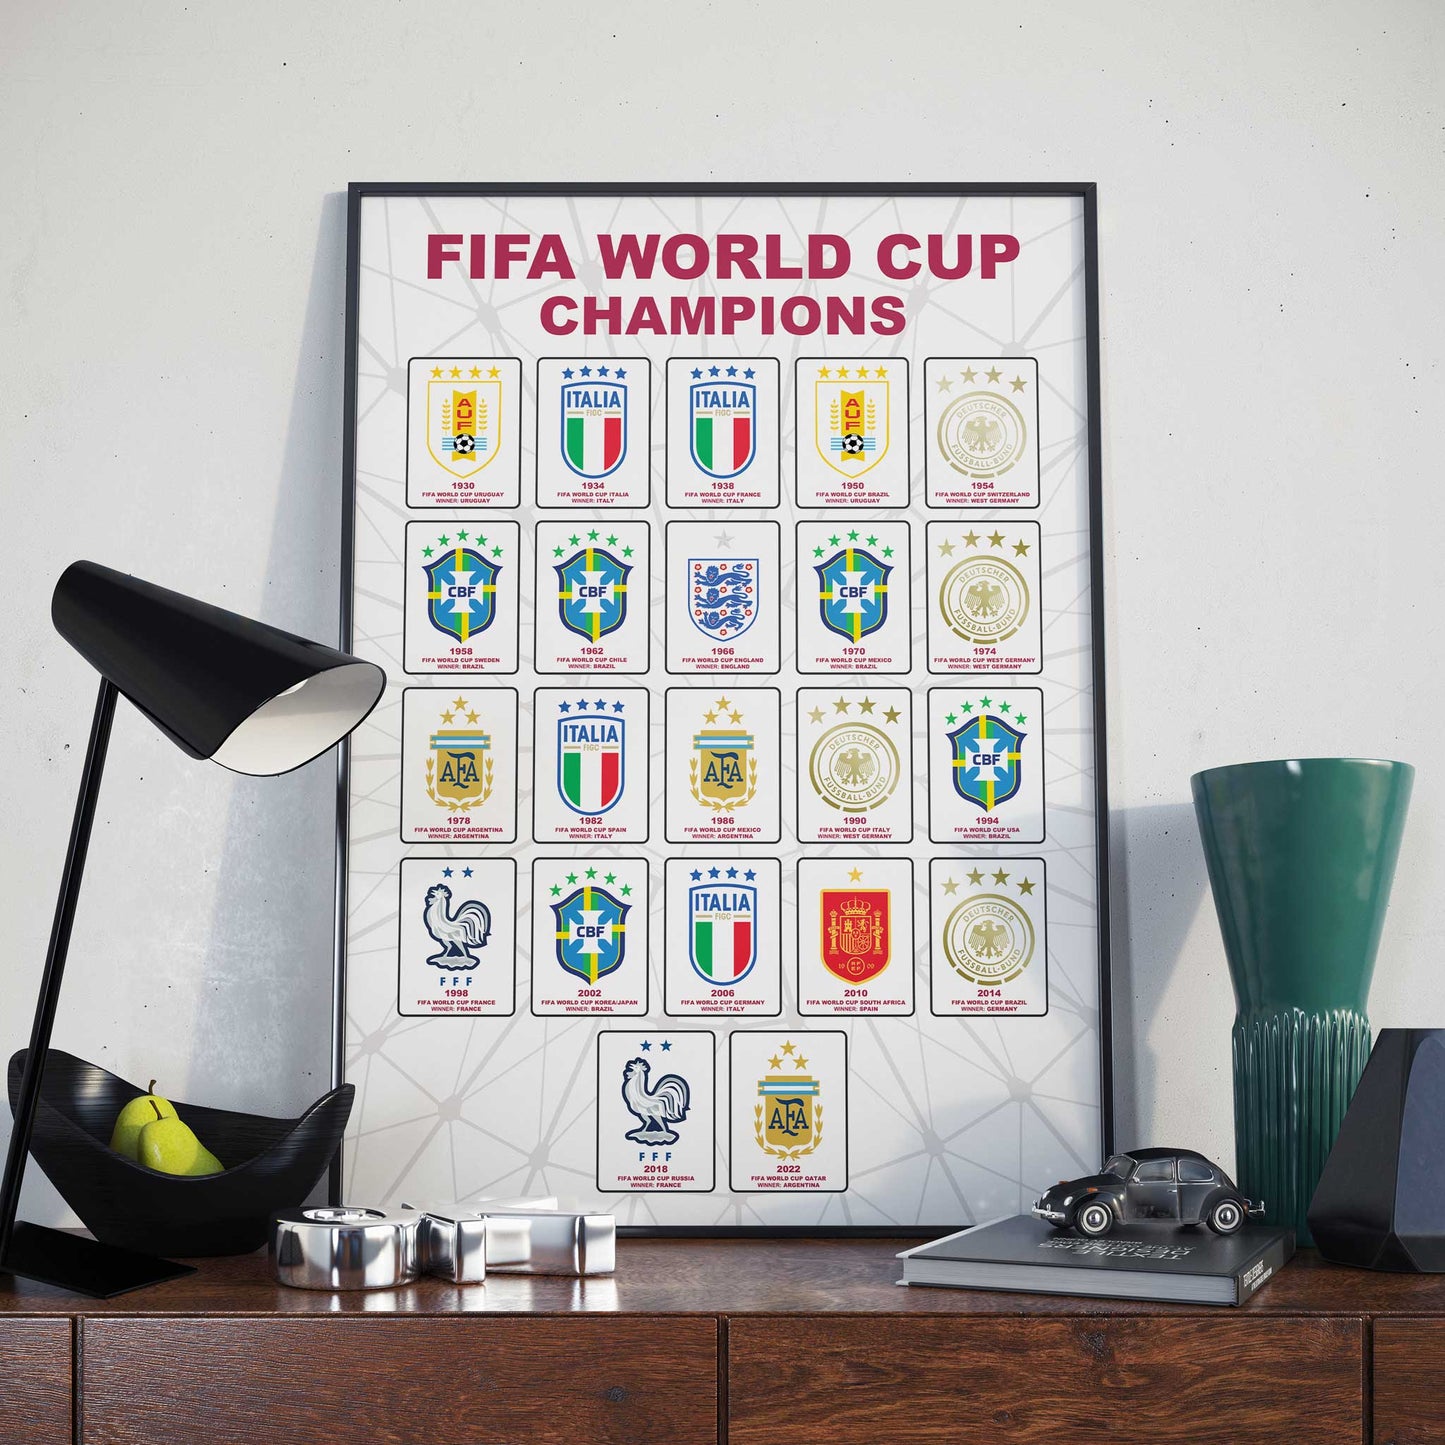 World Cup Champions Football Poster - All World Cup Winners From 1930 to 2026